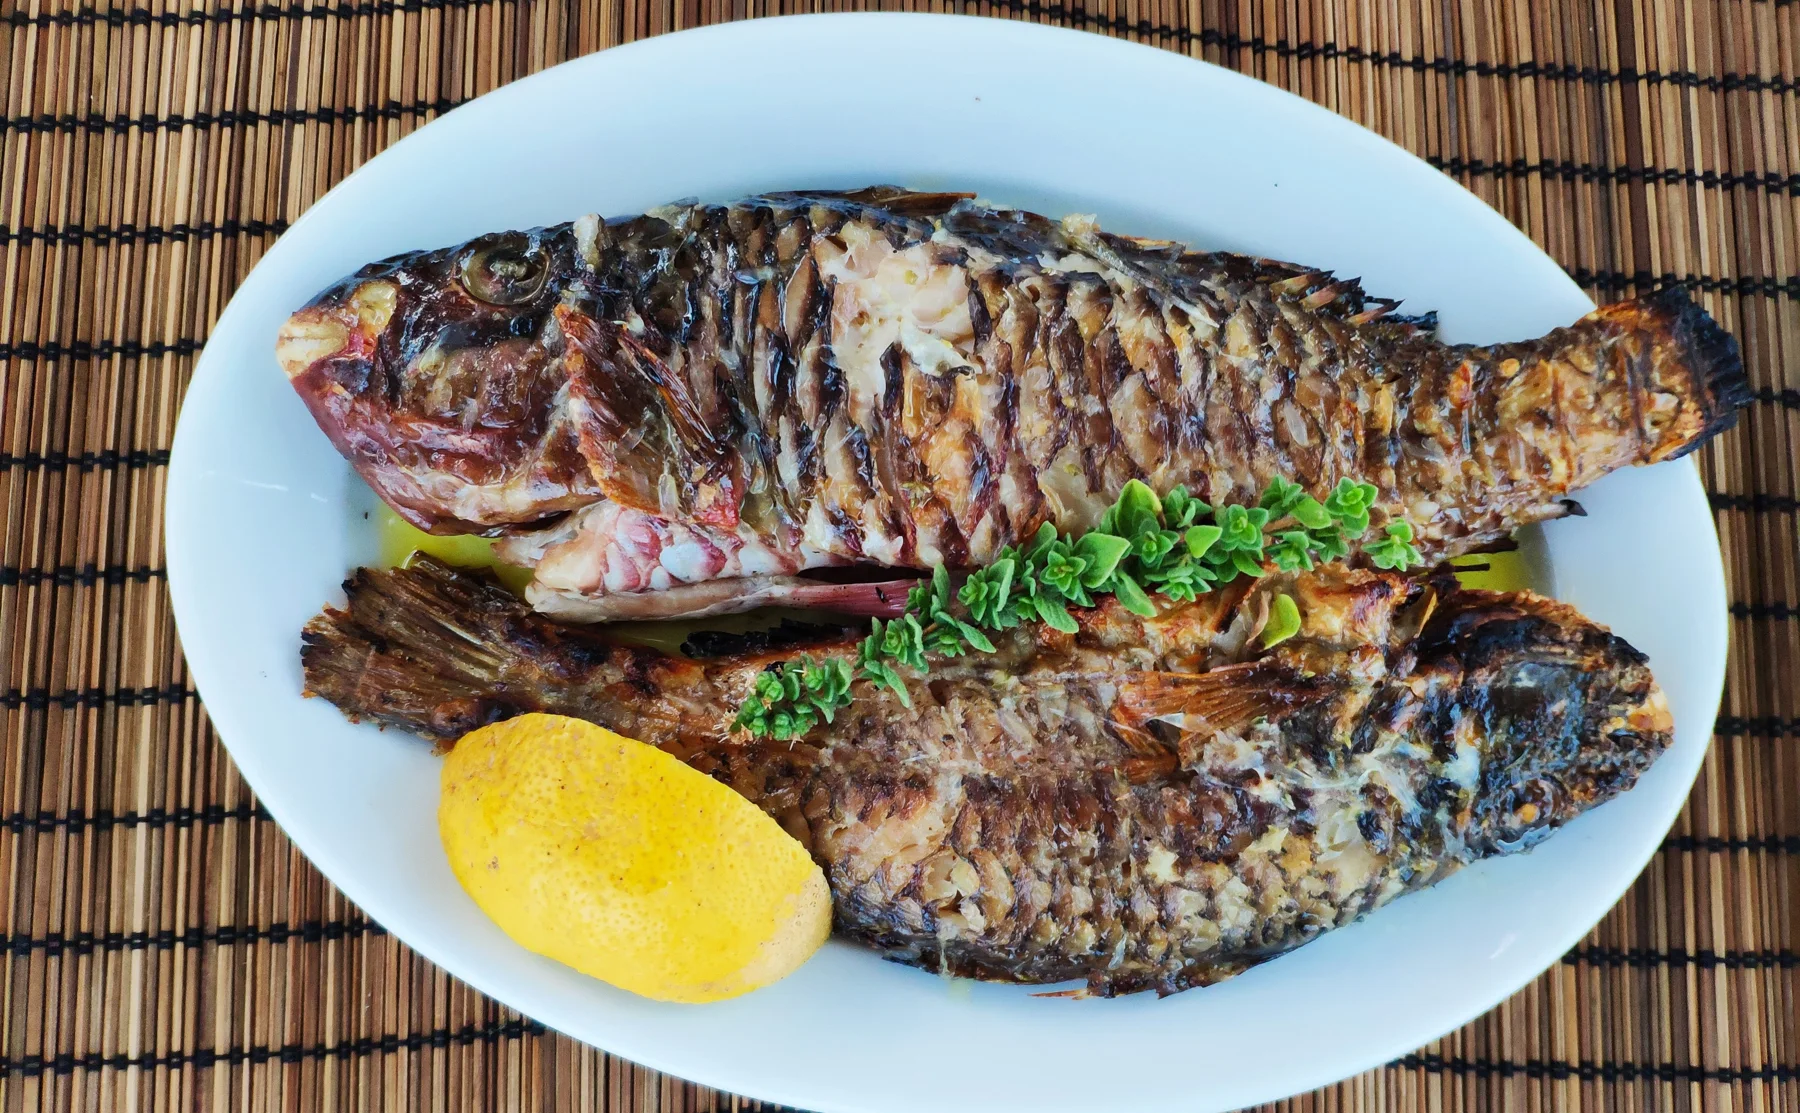 Wonderful dinner with fresh Greek fishes cooking in the wooden oven and smoked by the olive wood - 1433662